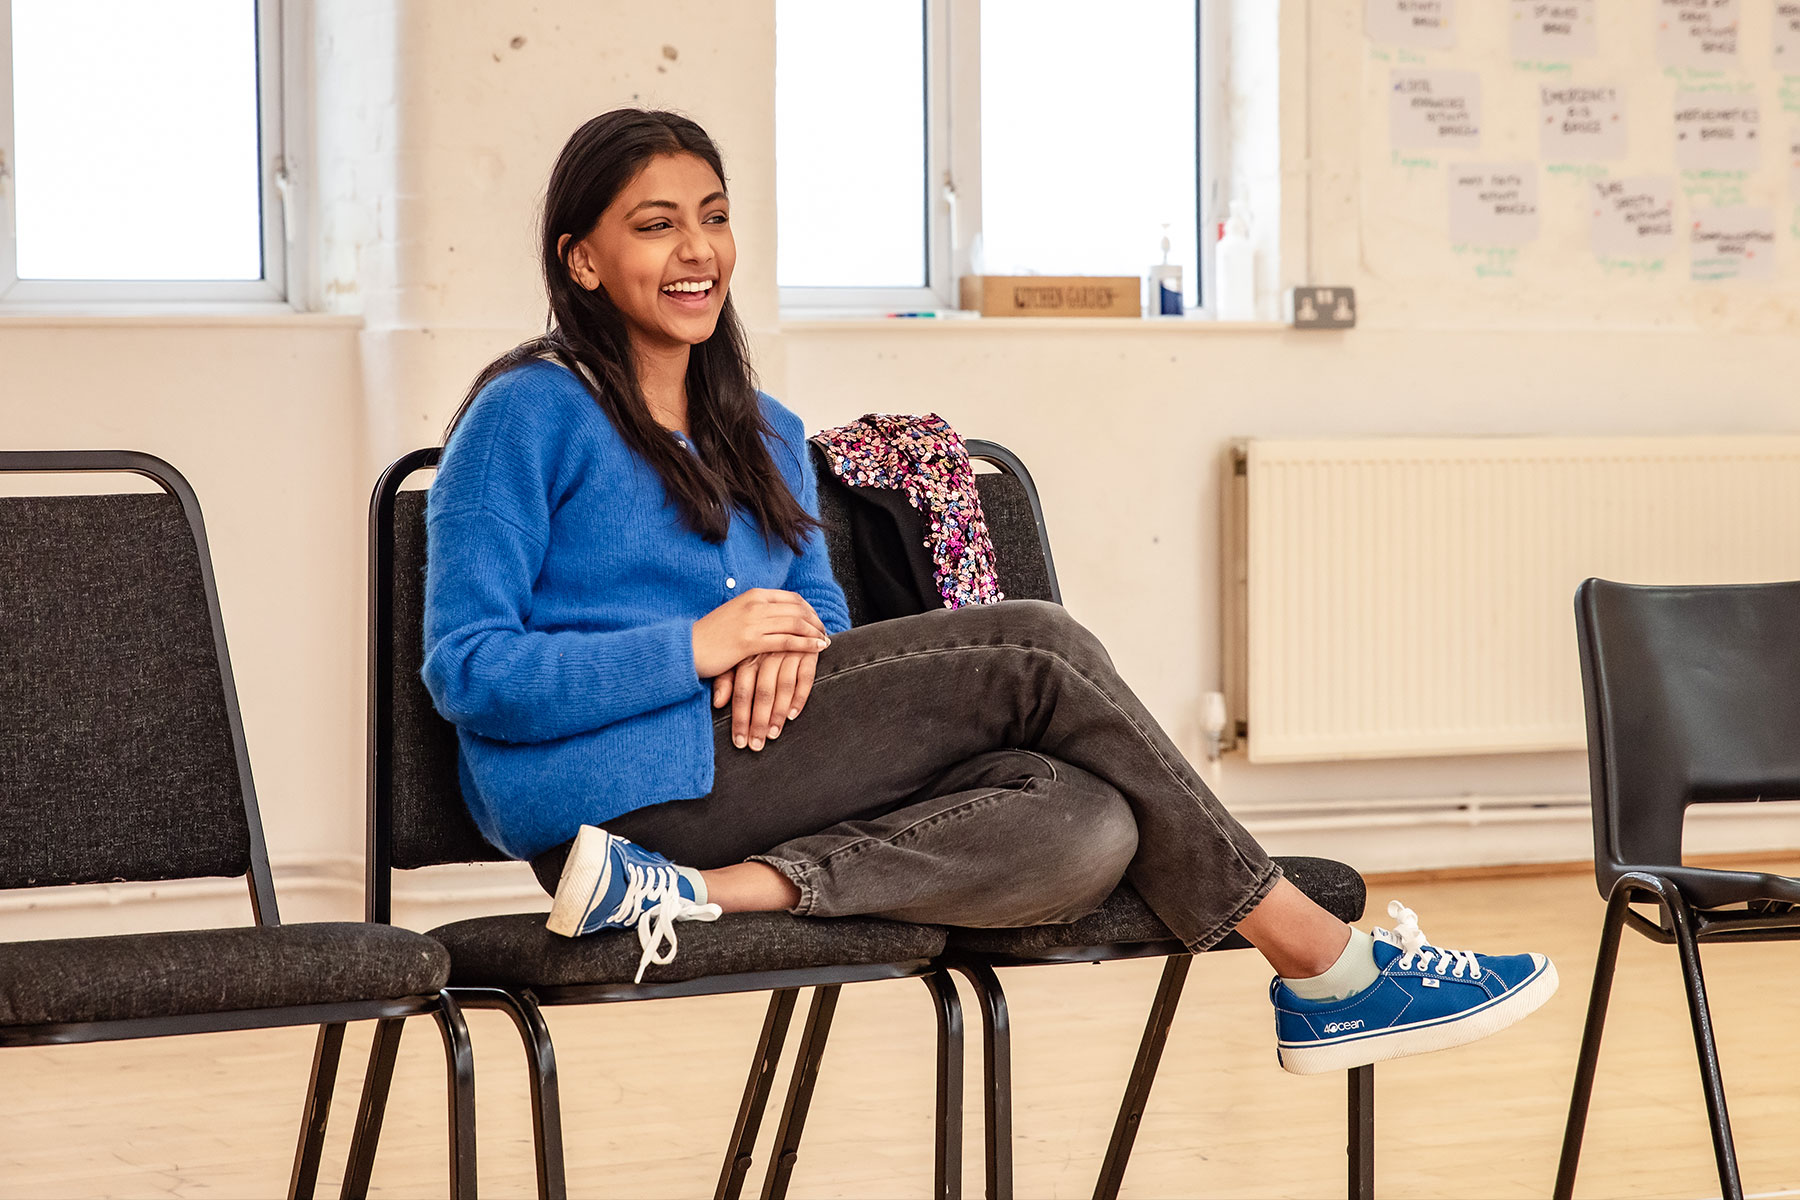 Charithra Chandran in rehearsals for Instructions for a Teenage Armageddon